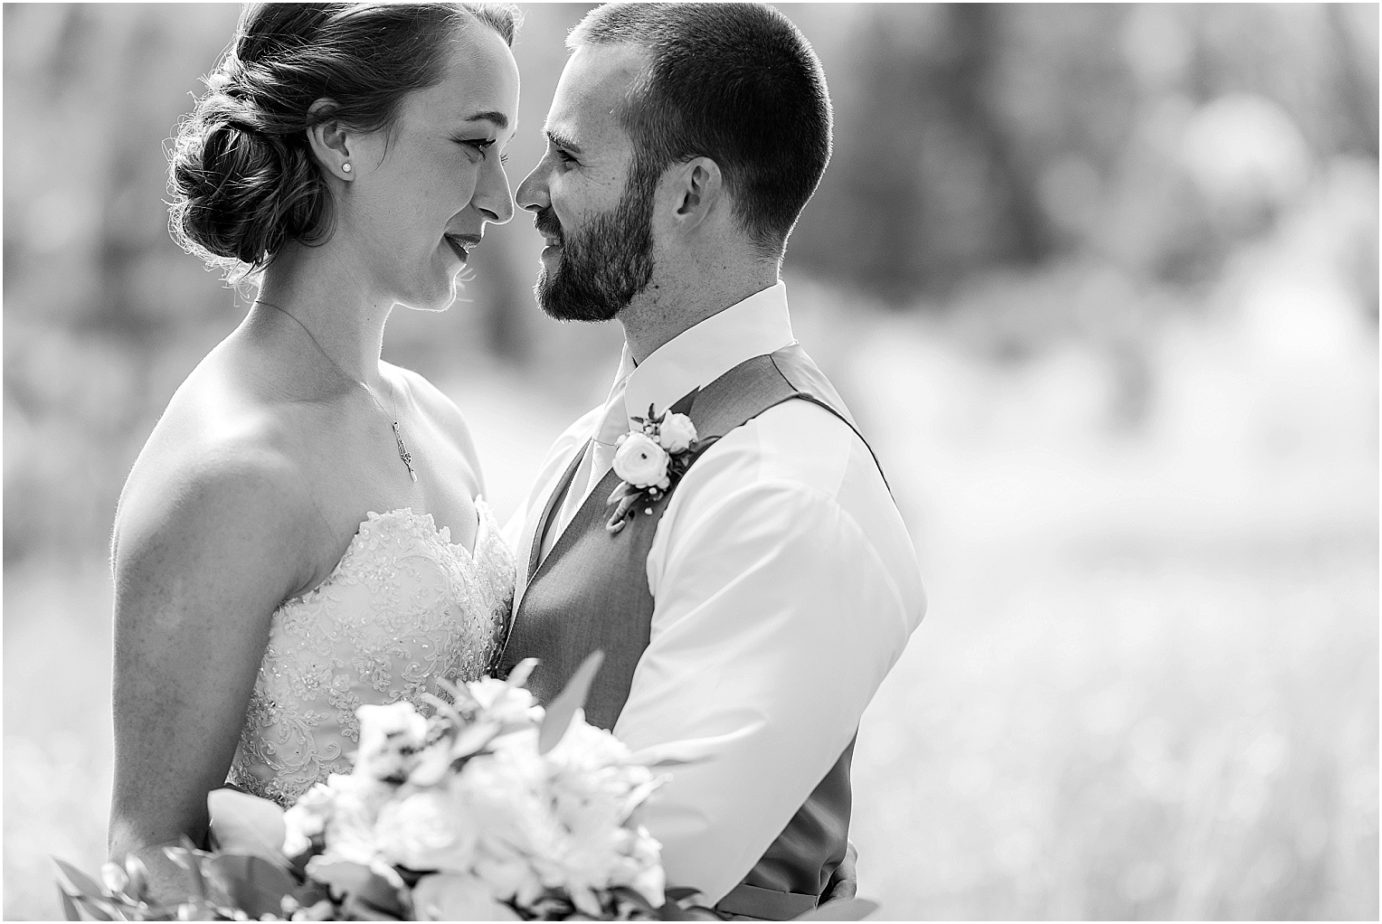 Pine River Ranch Wedding Leavenworth WA Matt and Kelsey Bride and groom portraits in the mountains